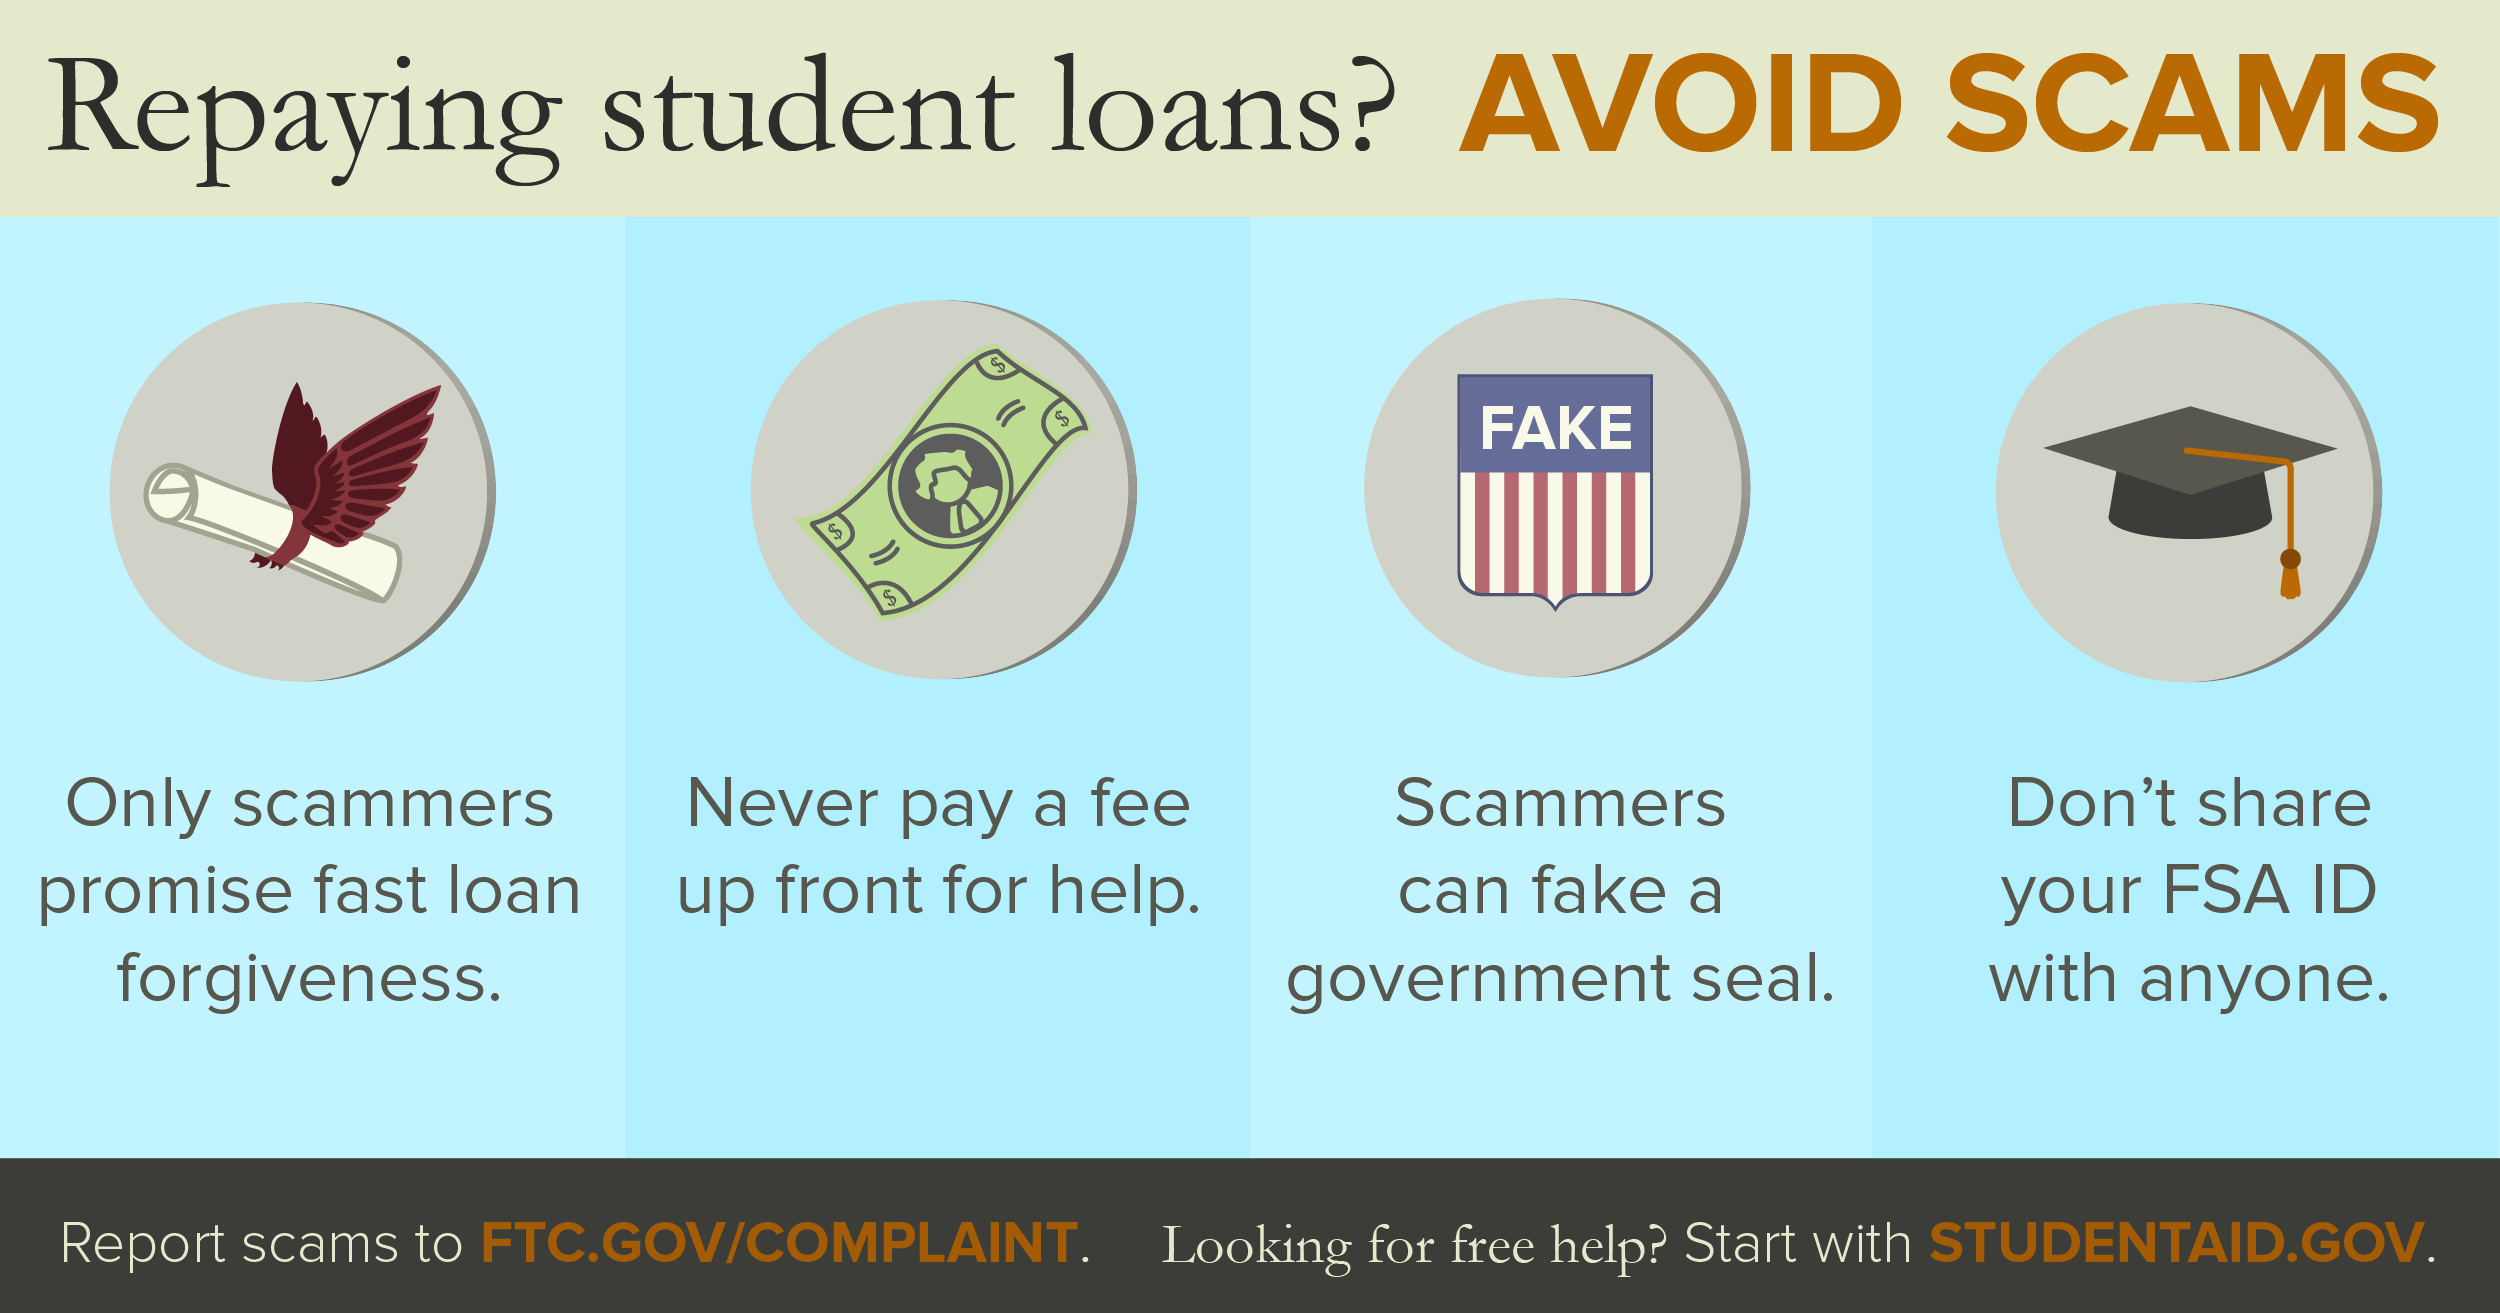 Graphic: Repaying student loans? Avoid Scams with these tips.